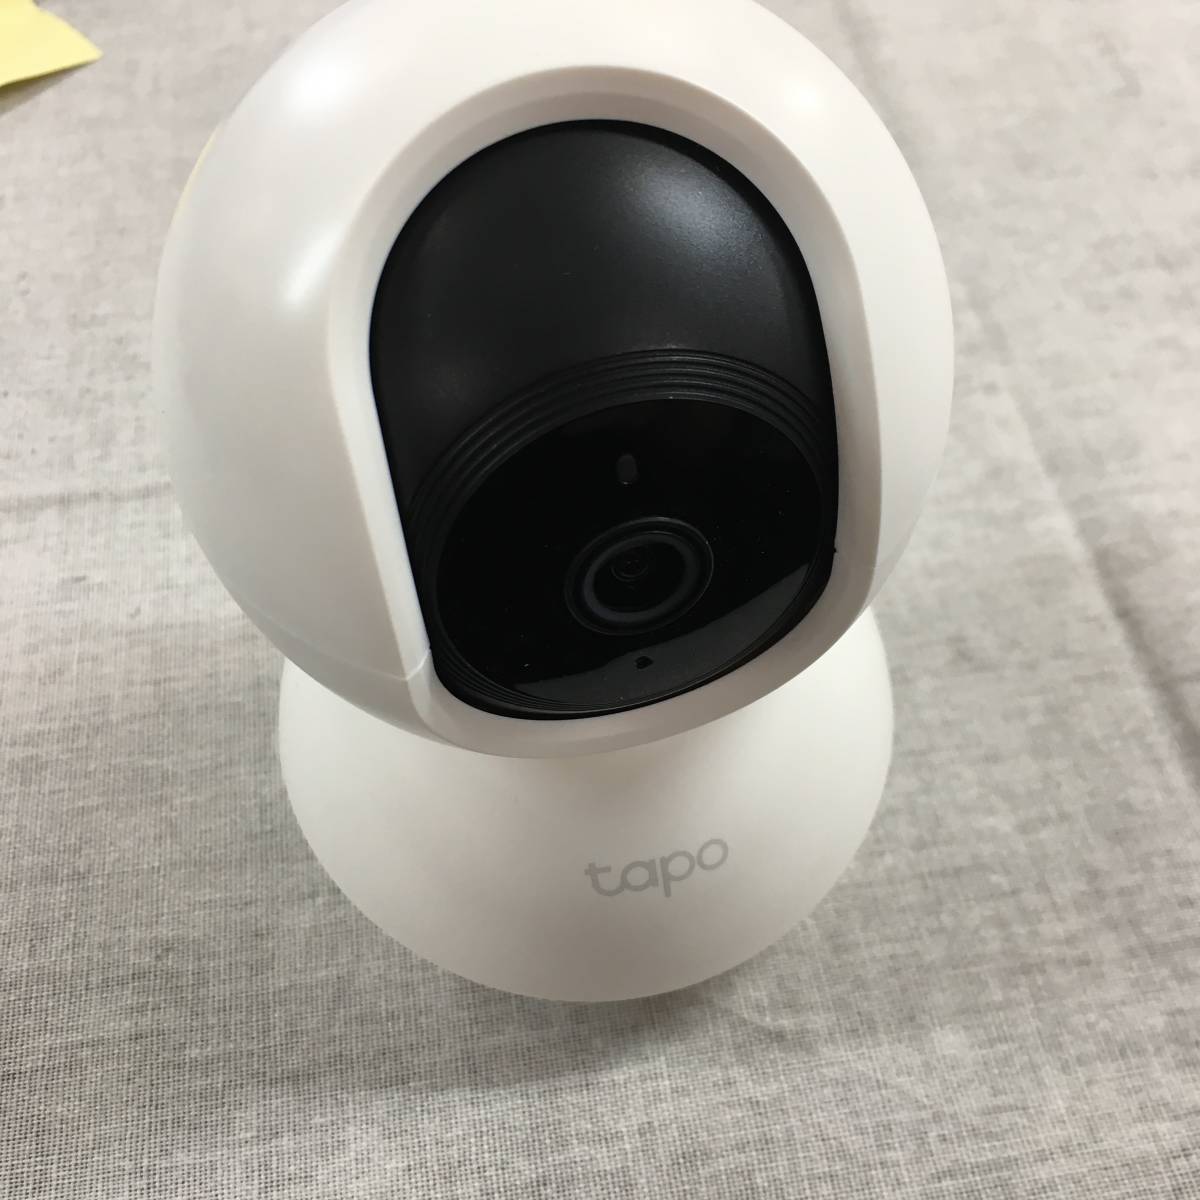  present condition goods TP-Link network Wi-Fi camera pet camera full HD indoor camera nighttime photographing .. sound conversation operation detection smartphone notification Tapo C200